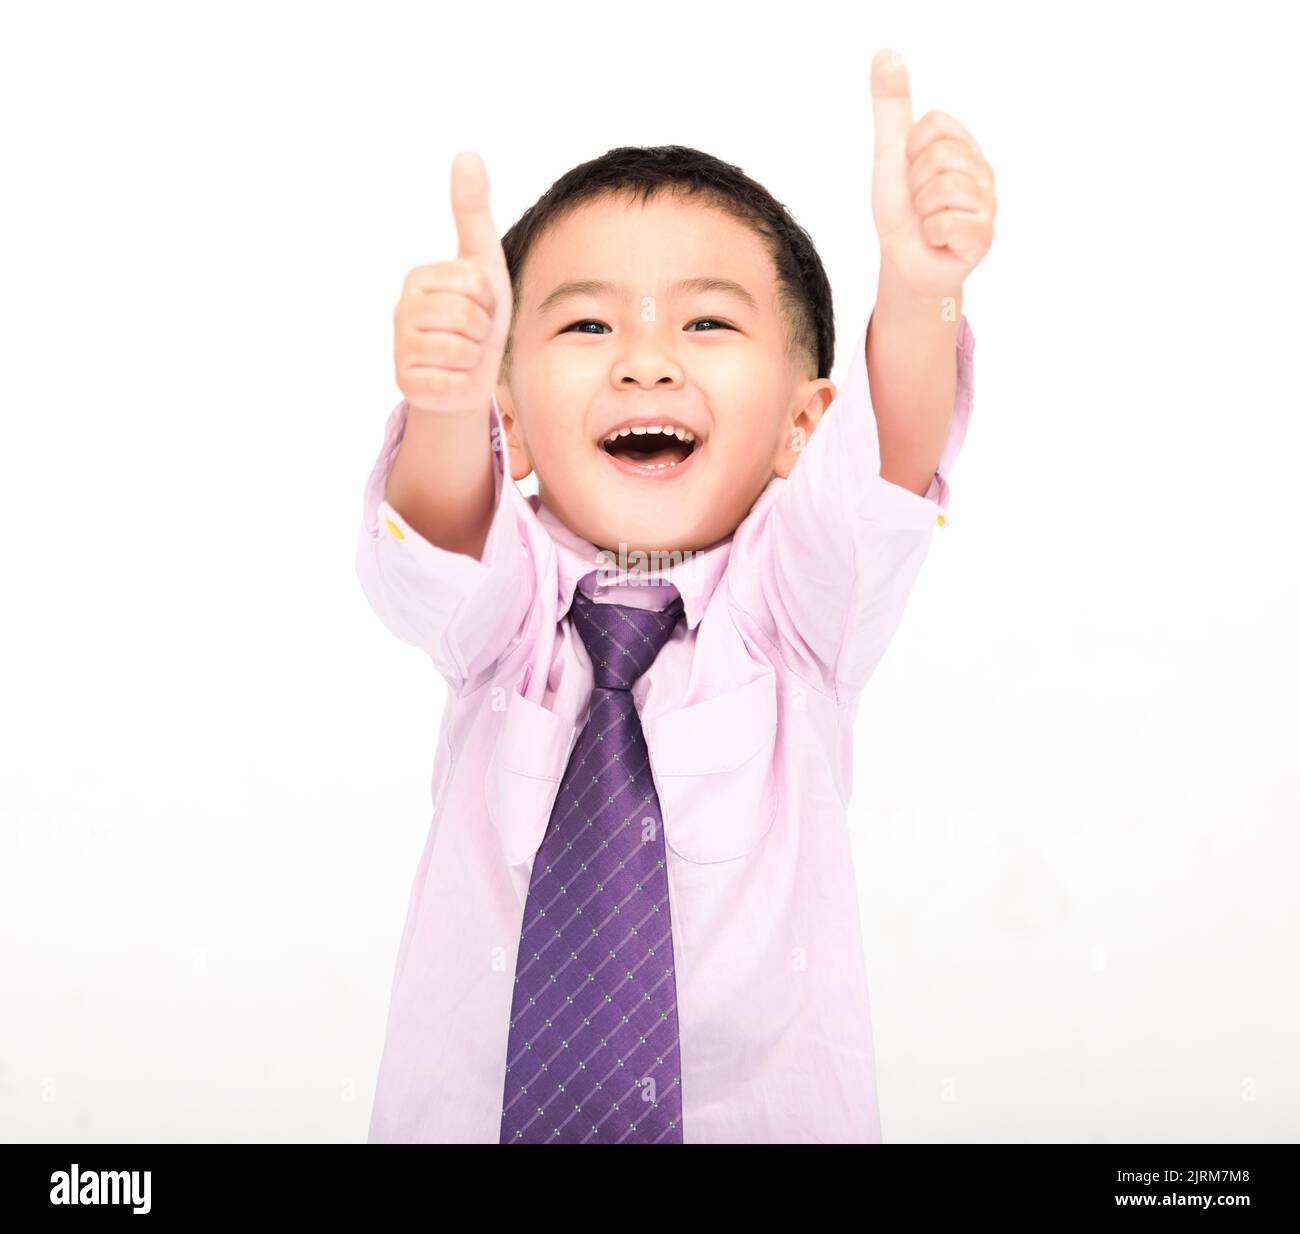 Happy Boy in a suit and showing thumbs up isolated on white background Stock Photo